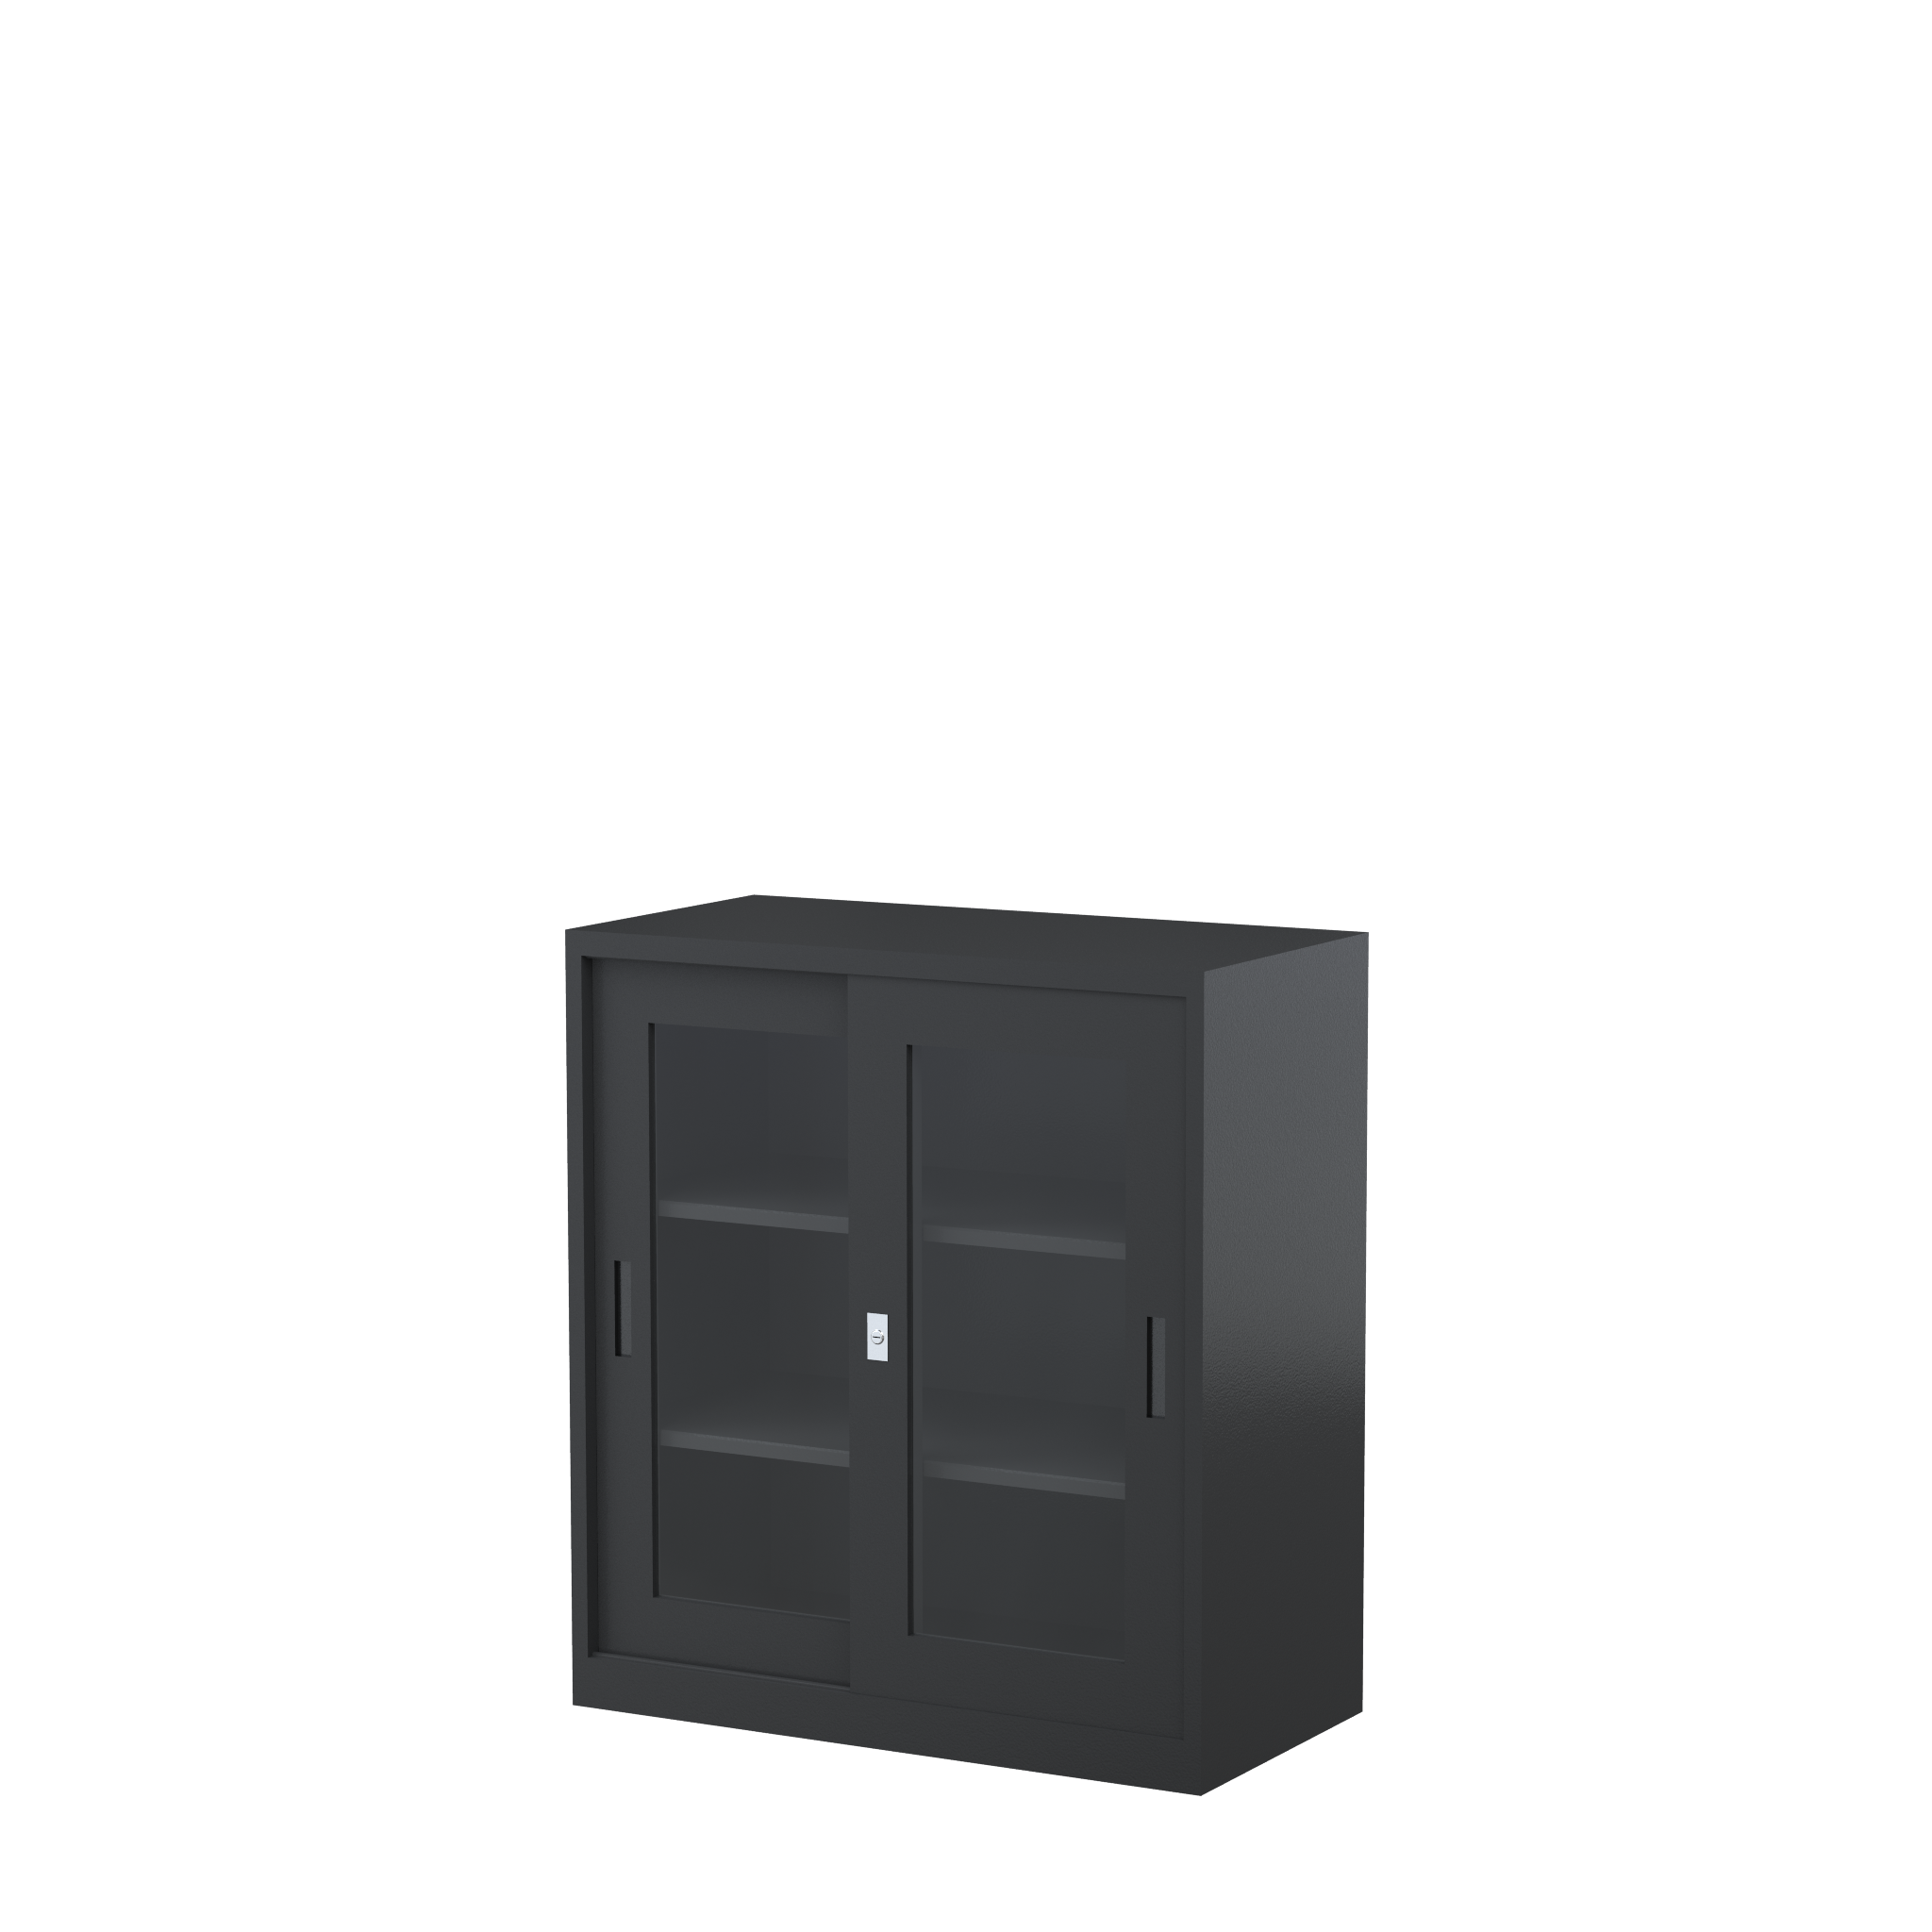 GD1015_914 - STEELCO SG Cabinet 1015H x 914W x 465D - 2 Shelves-GR.png